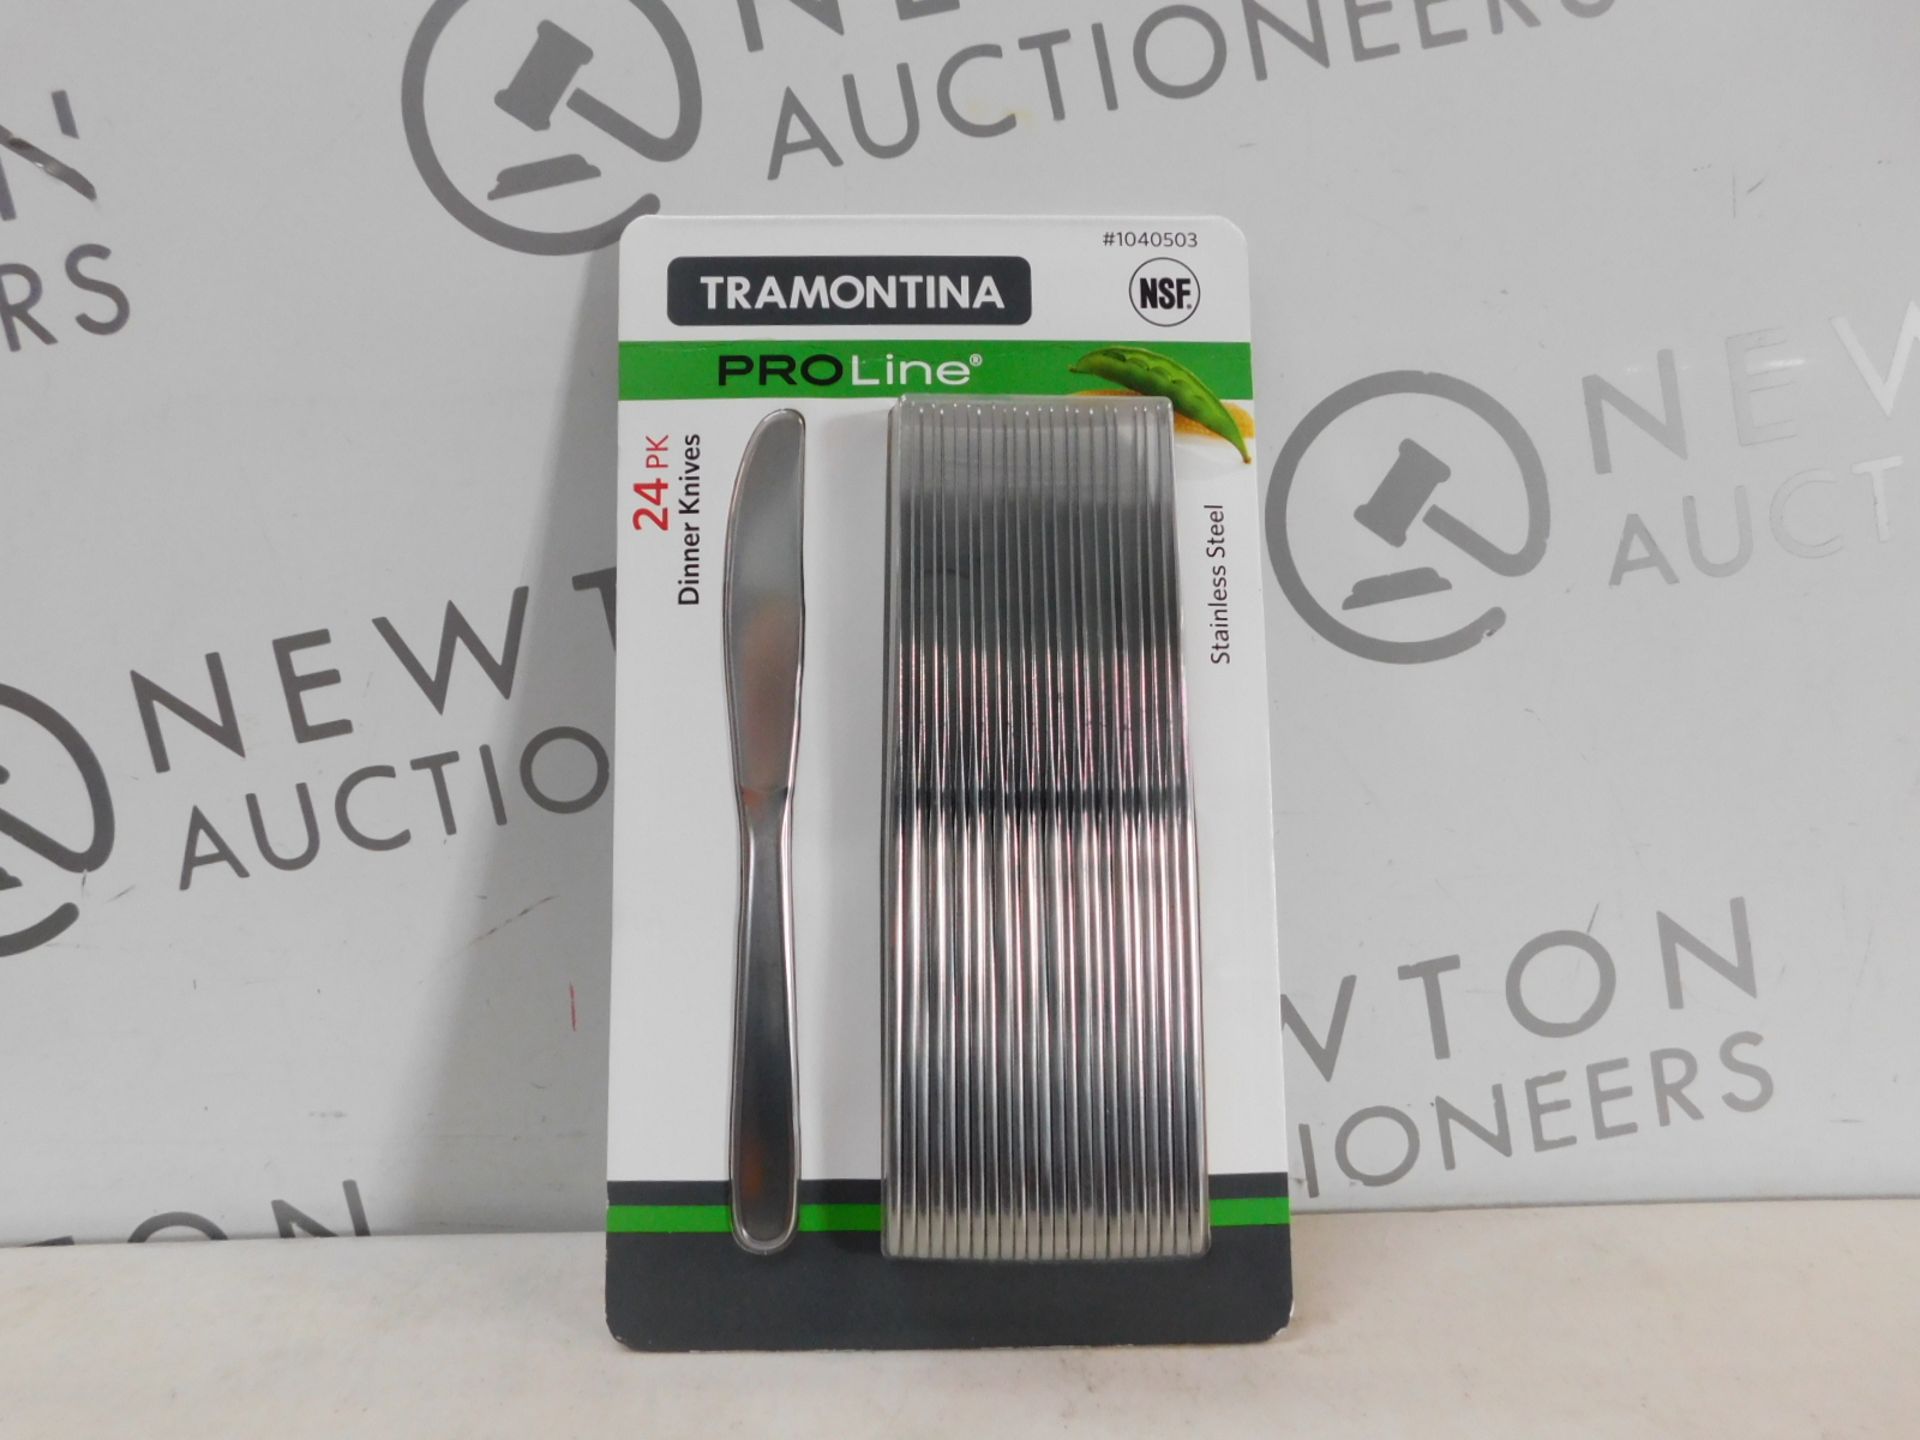 1 BRAND NEW PACK OF TRAMONTINA PROLINE 24PK STAINLESS STEEL DINNER KNIVES RRP Â£22.99 - Image 2 of 2